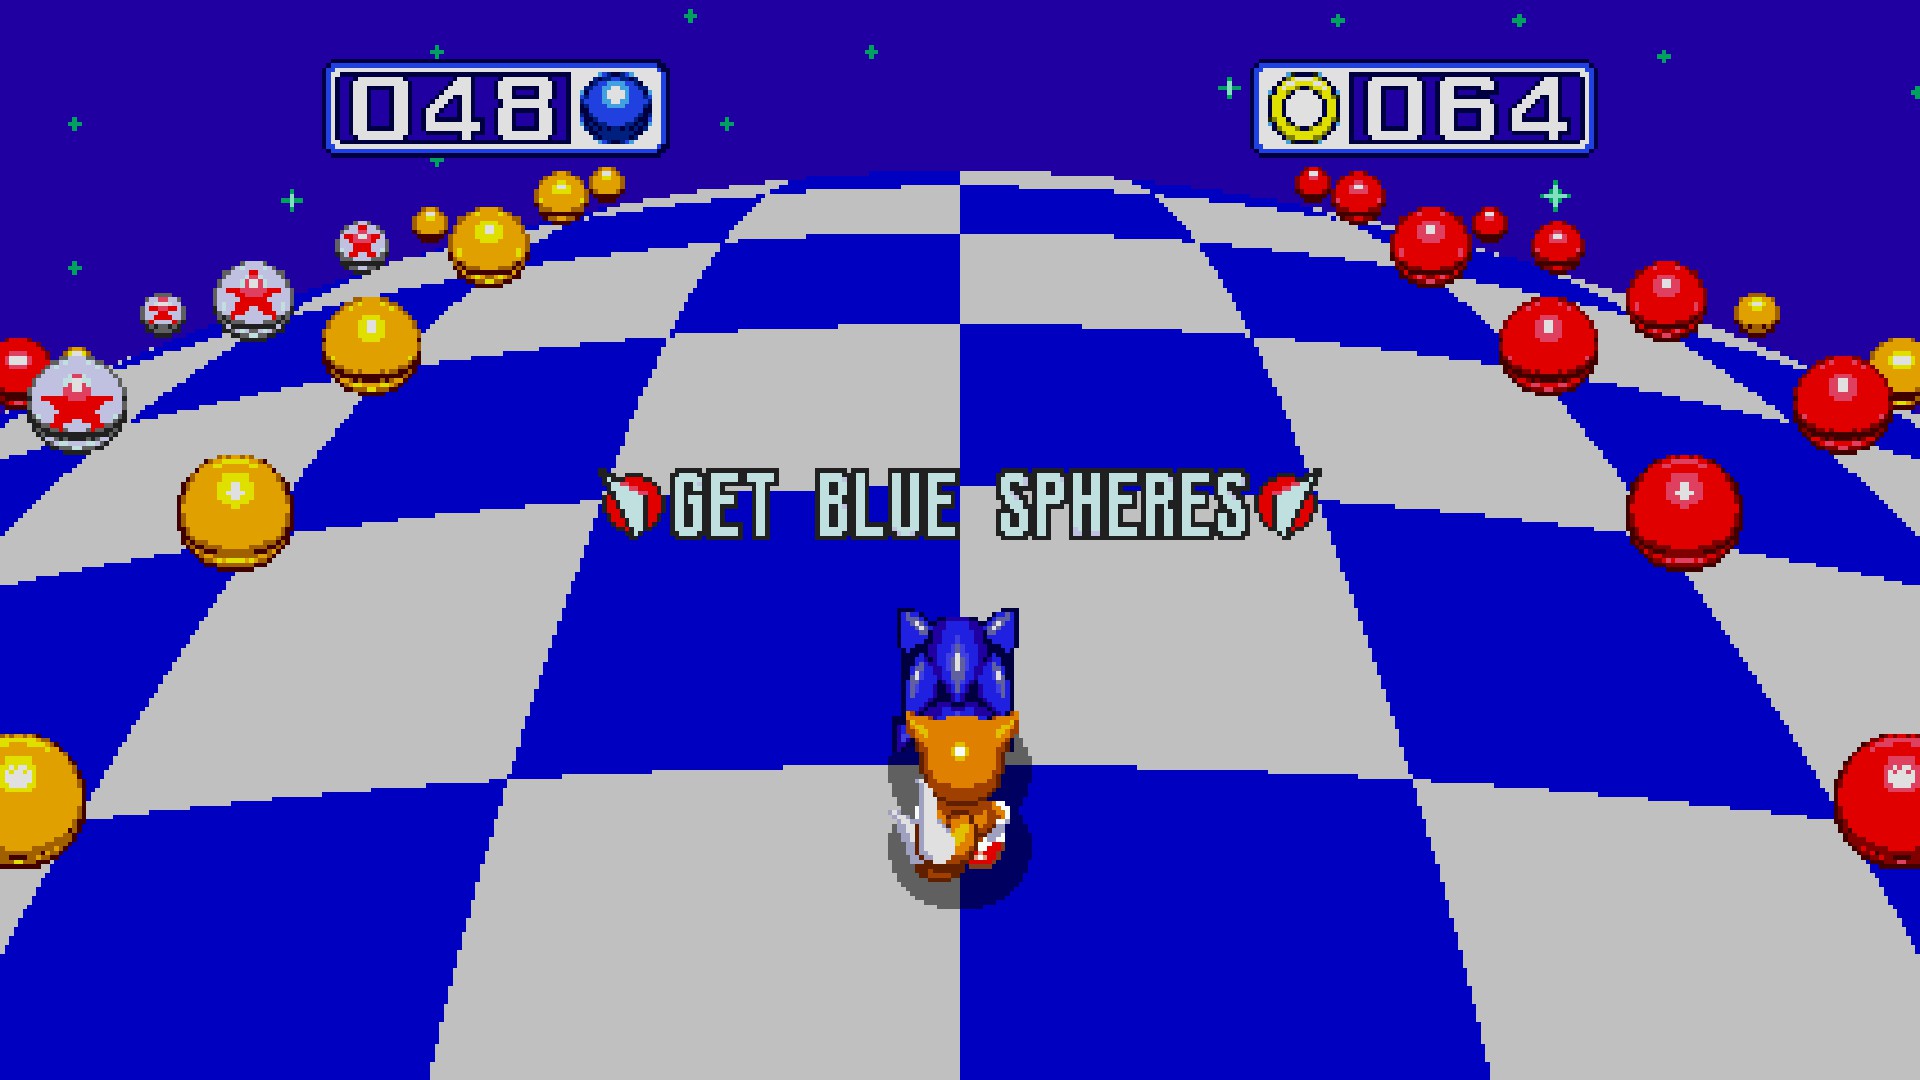 Sonic Origins Blue Spheres codes, Use level passwords to jump forward